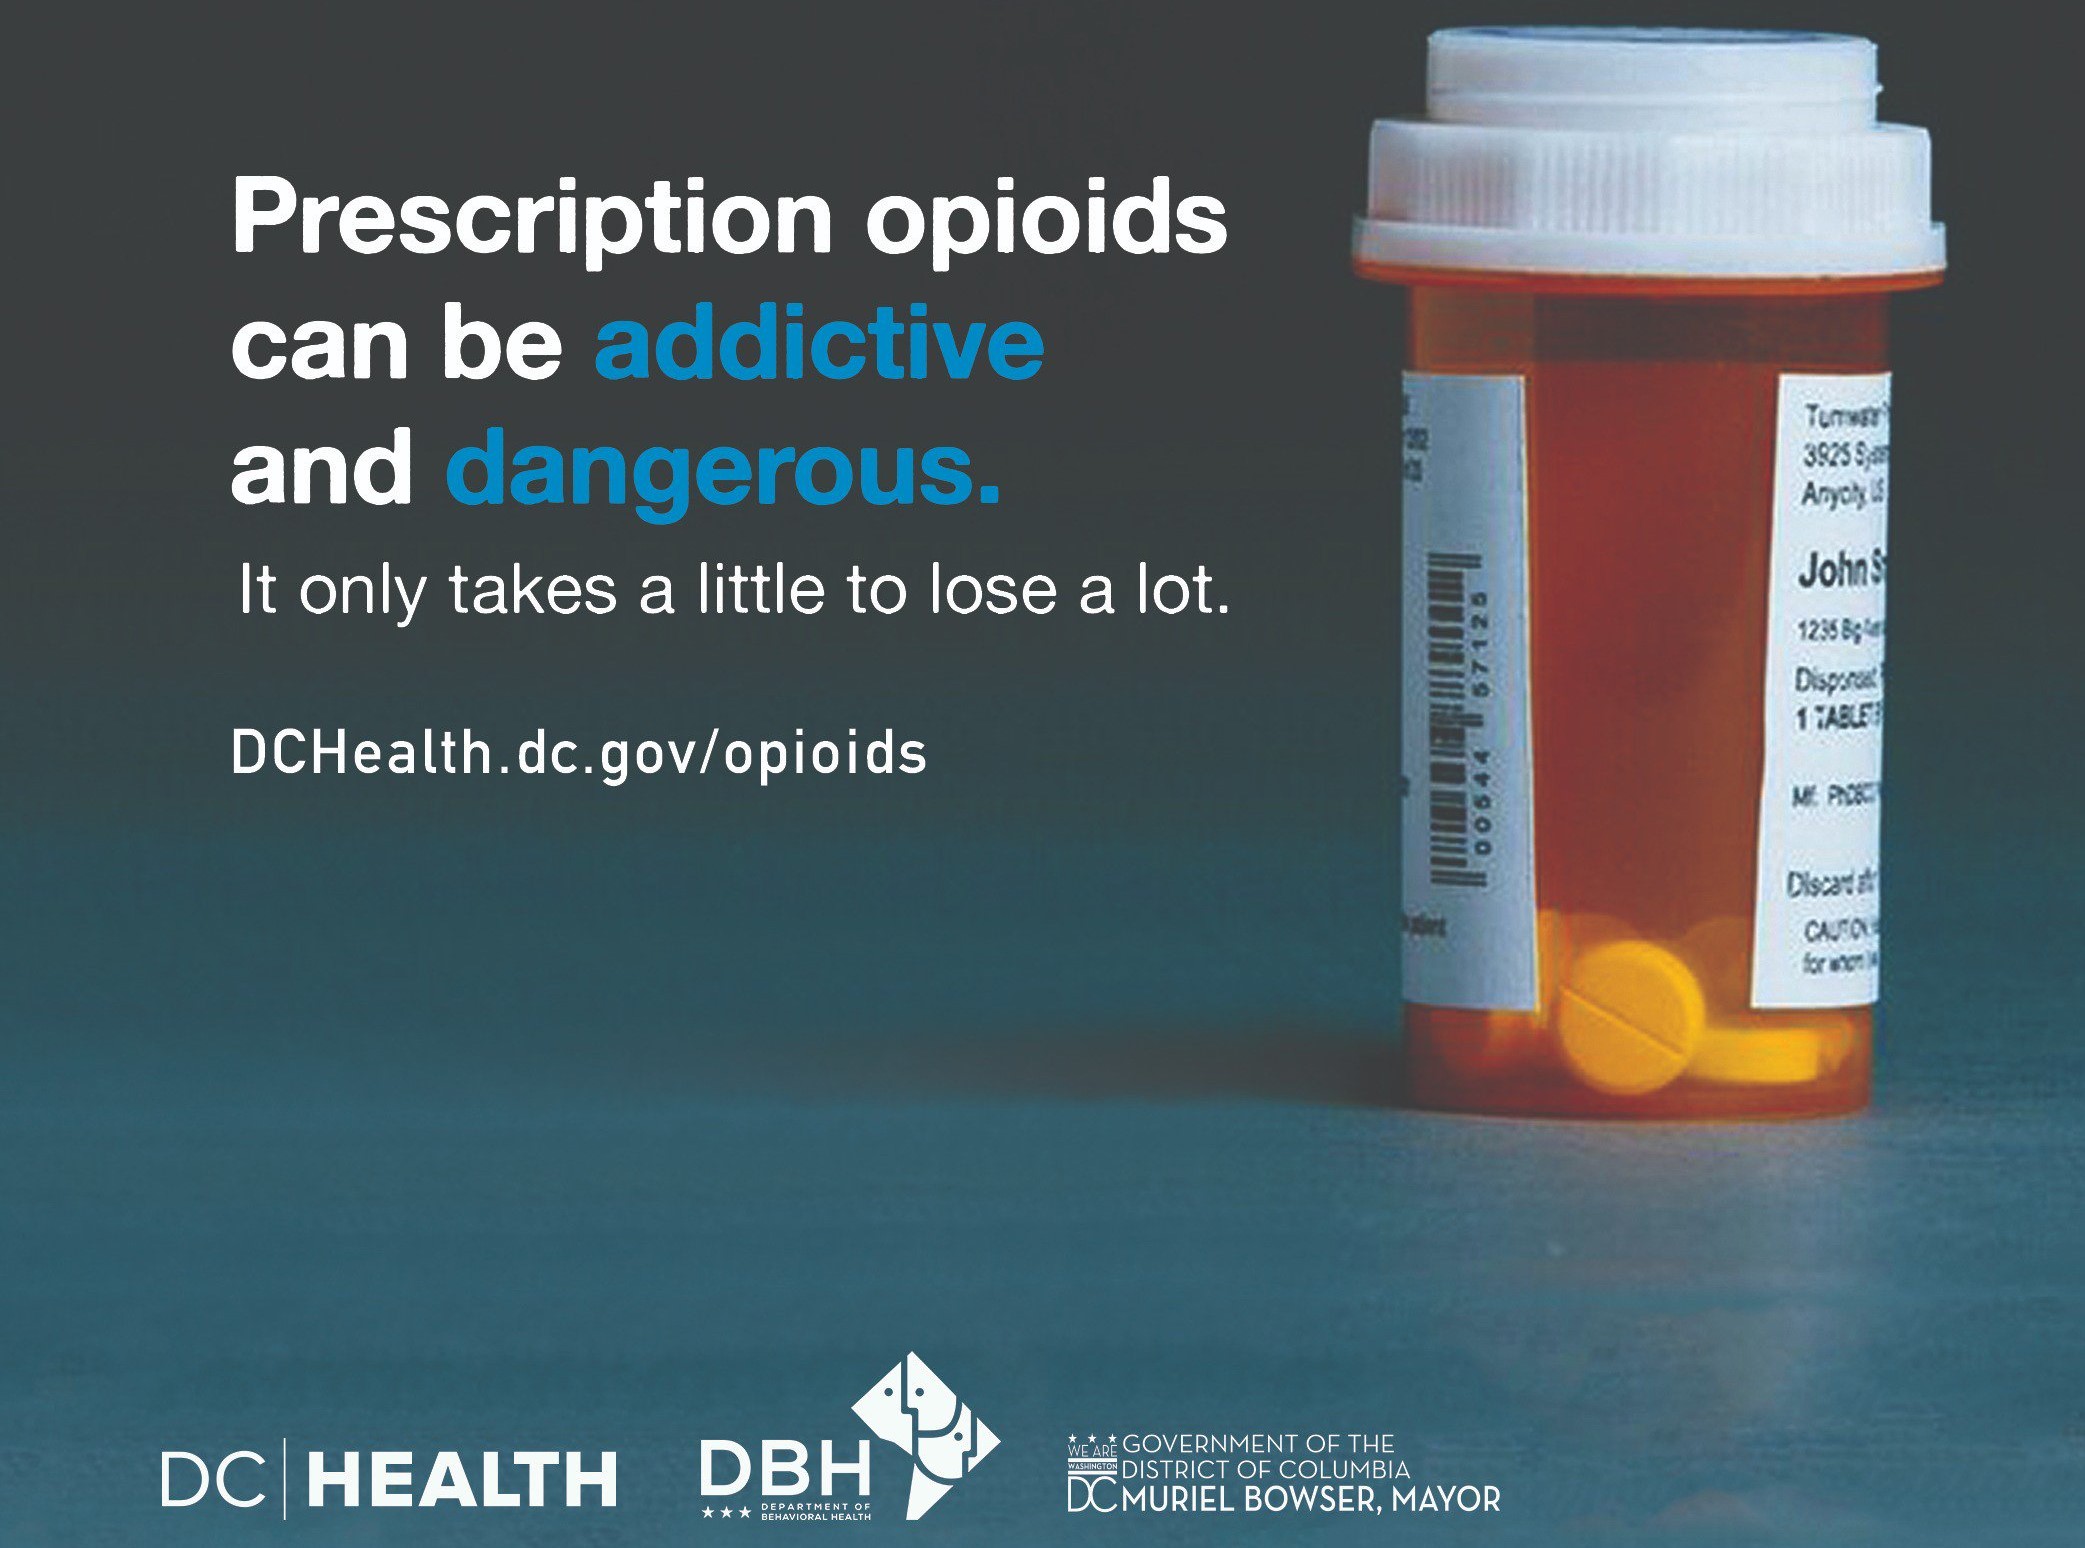 A prescription pill bottle and words prescription opioids can be addictive and dangerous. It only takes a little to lose a lot.